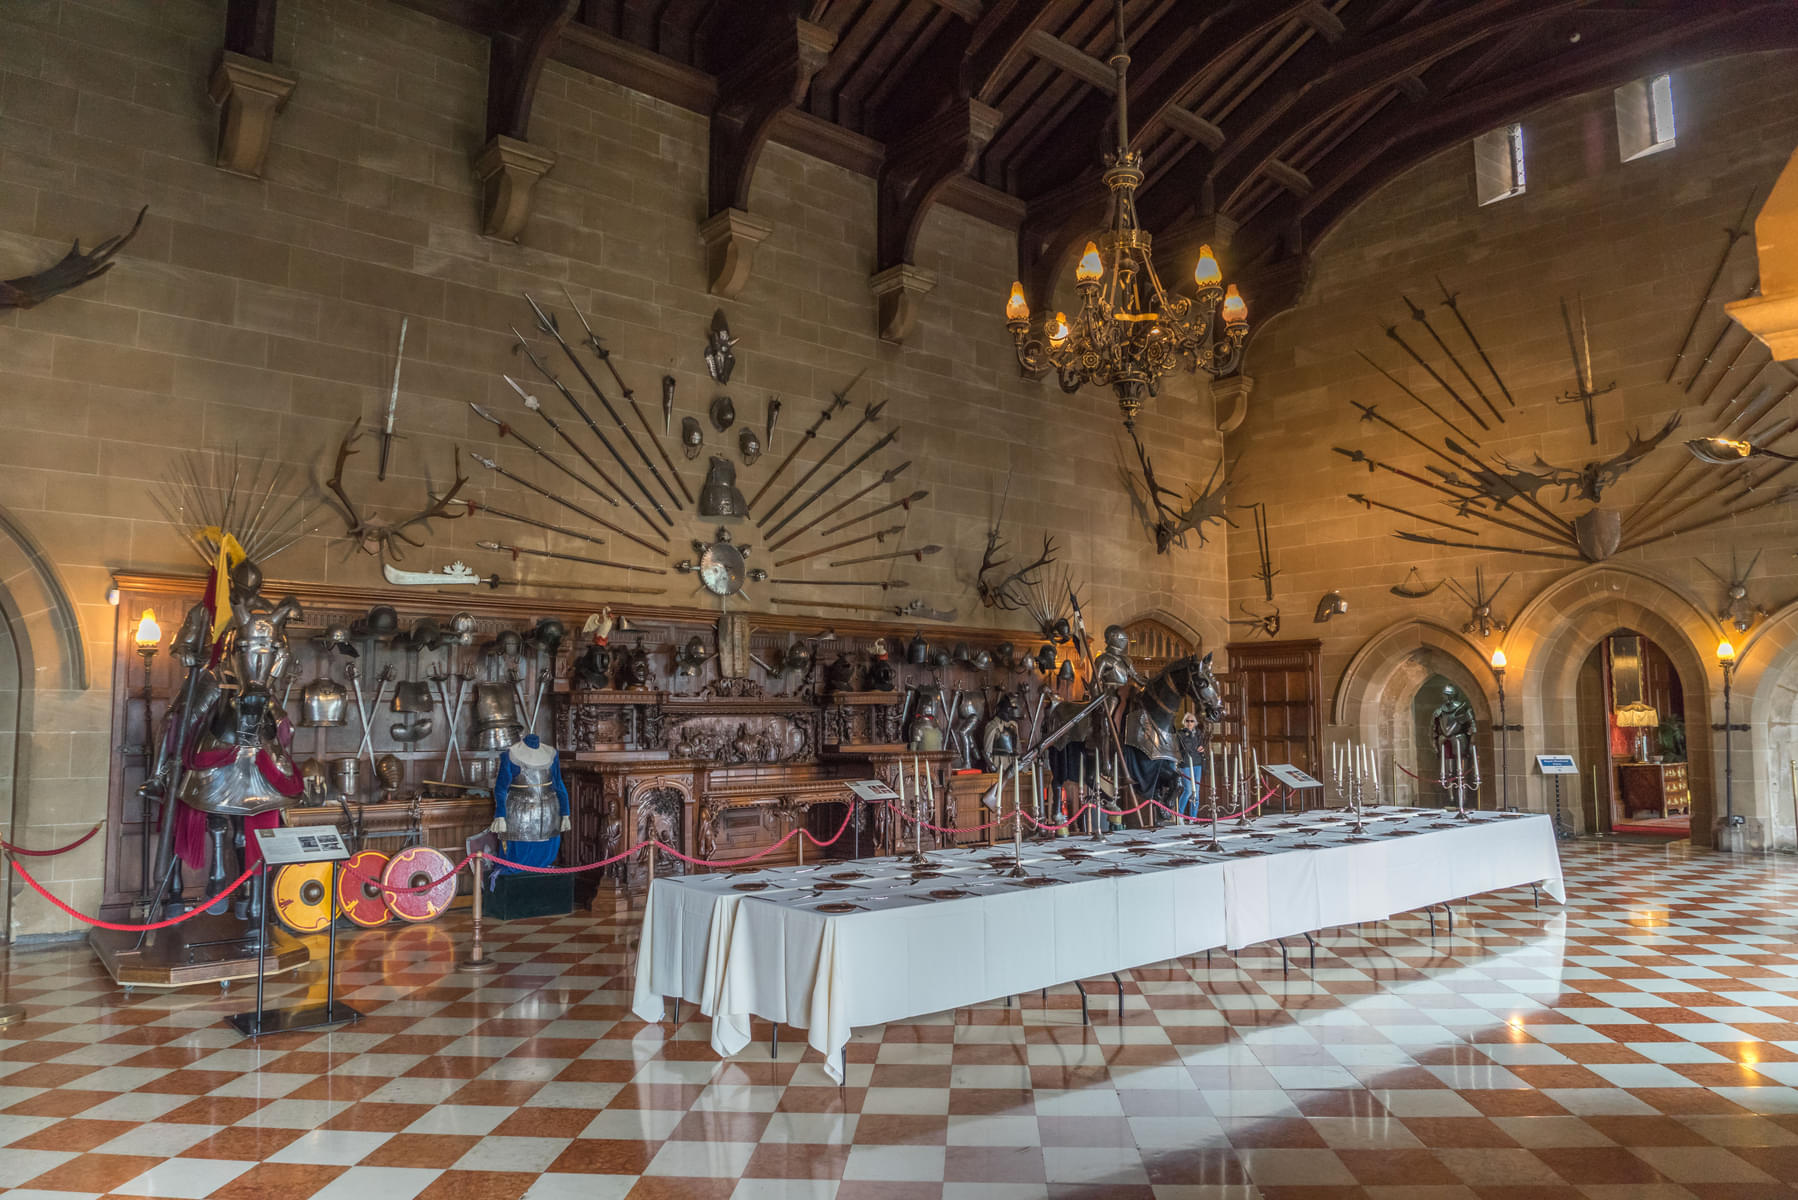 Look at suits of armor and weapons in the Grand Hall